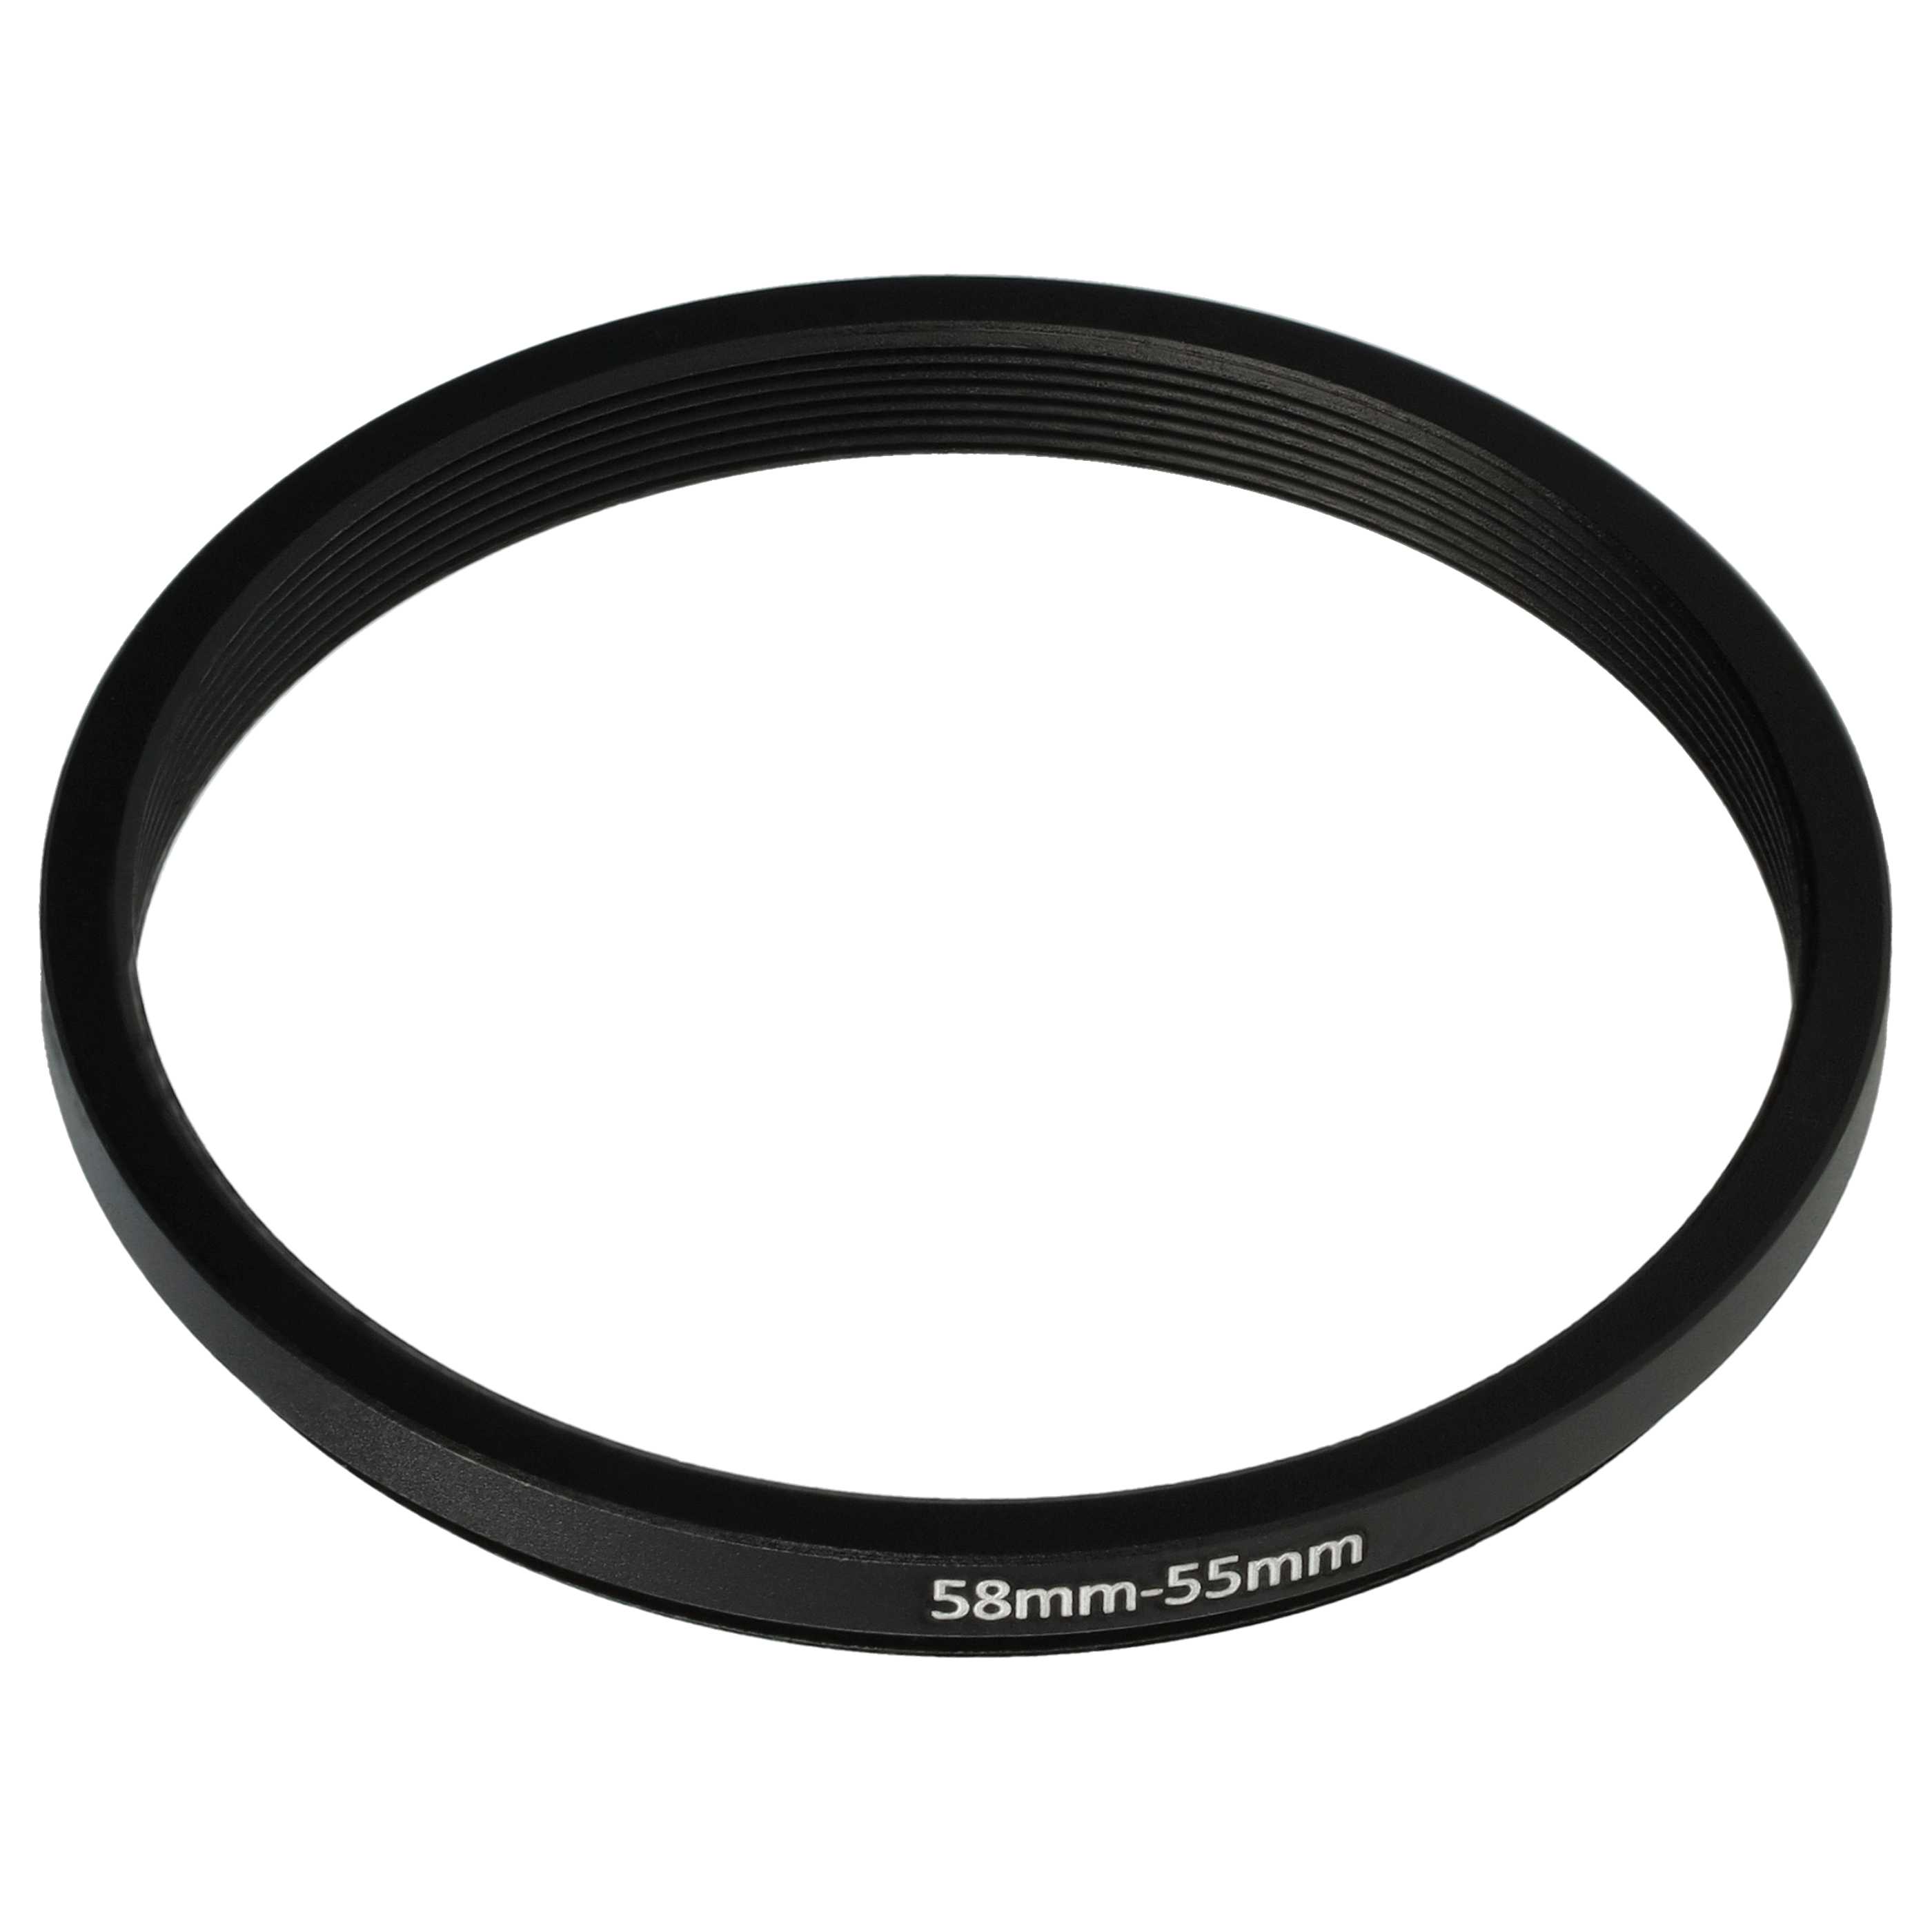 Step-Down Ring Adapter from 58 mm to 55 mm suitable for Camera Lens - Filter Adapter, metal